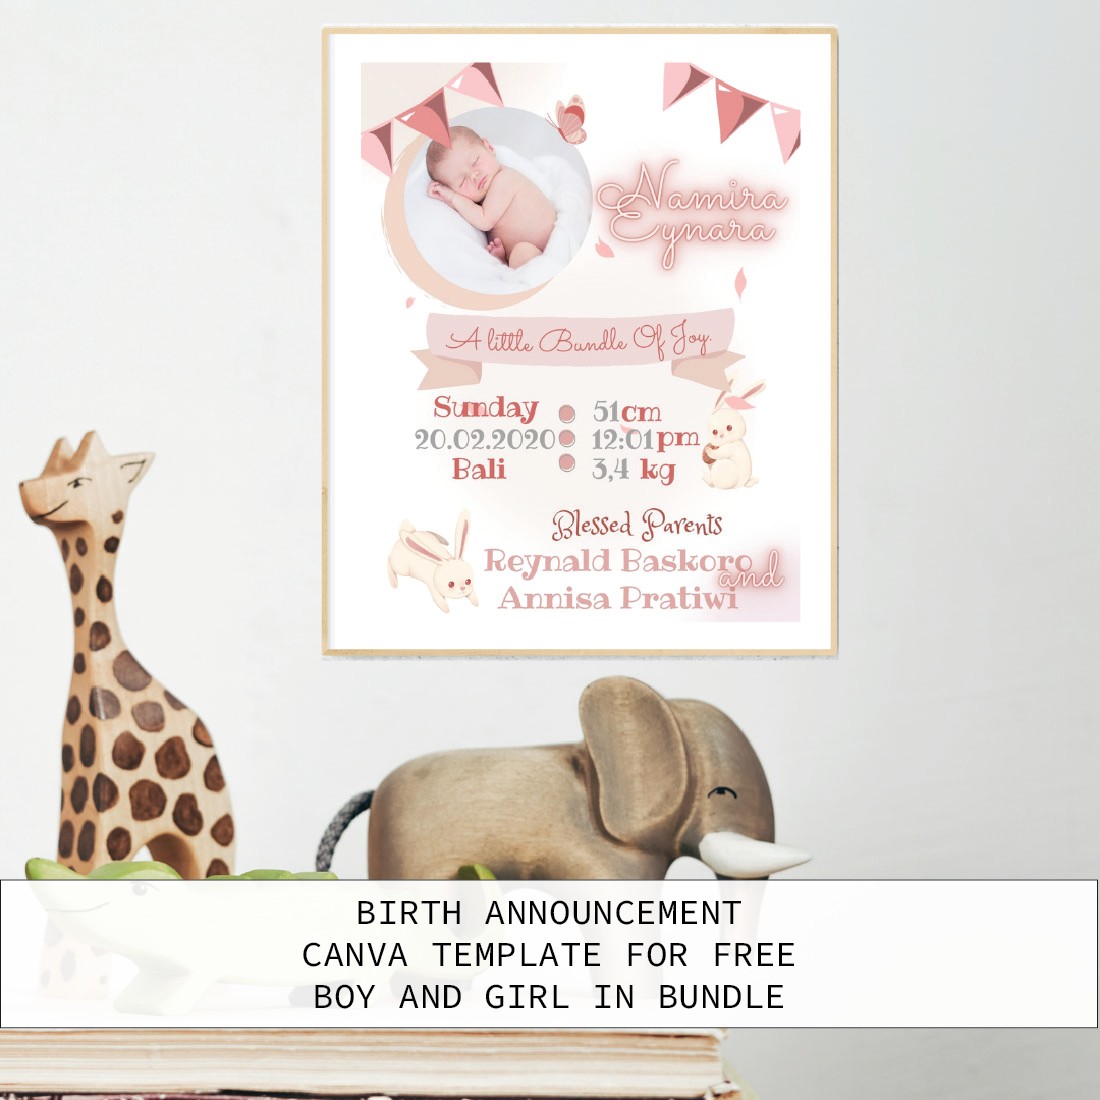 Birth Announcement Templates  for Boy and Girl